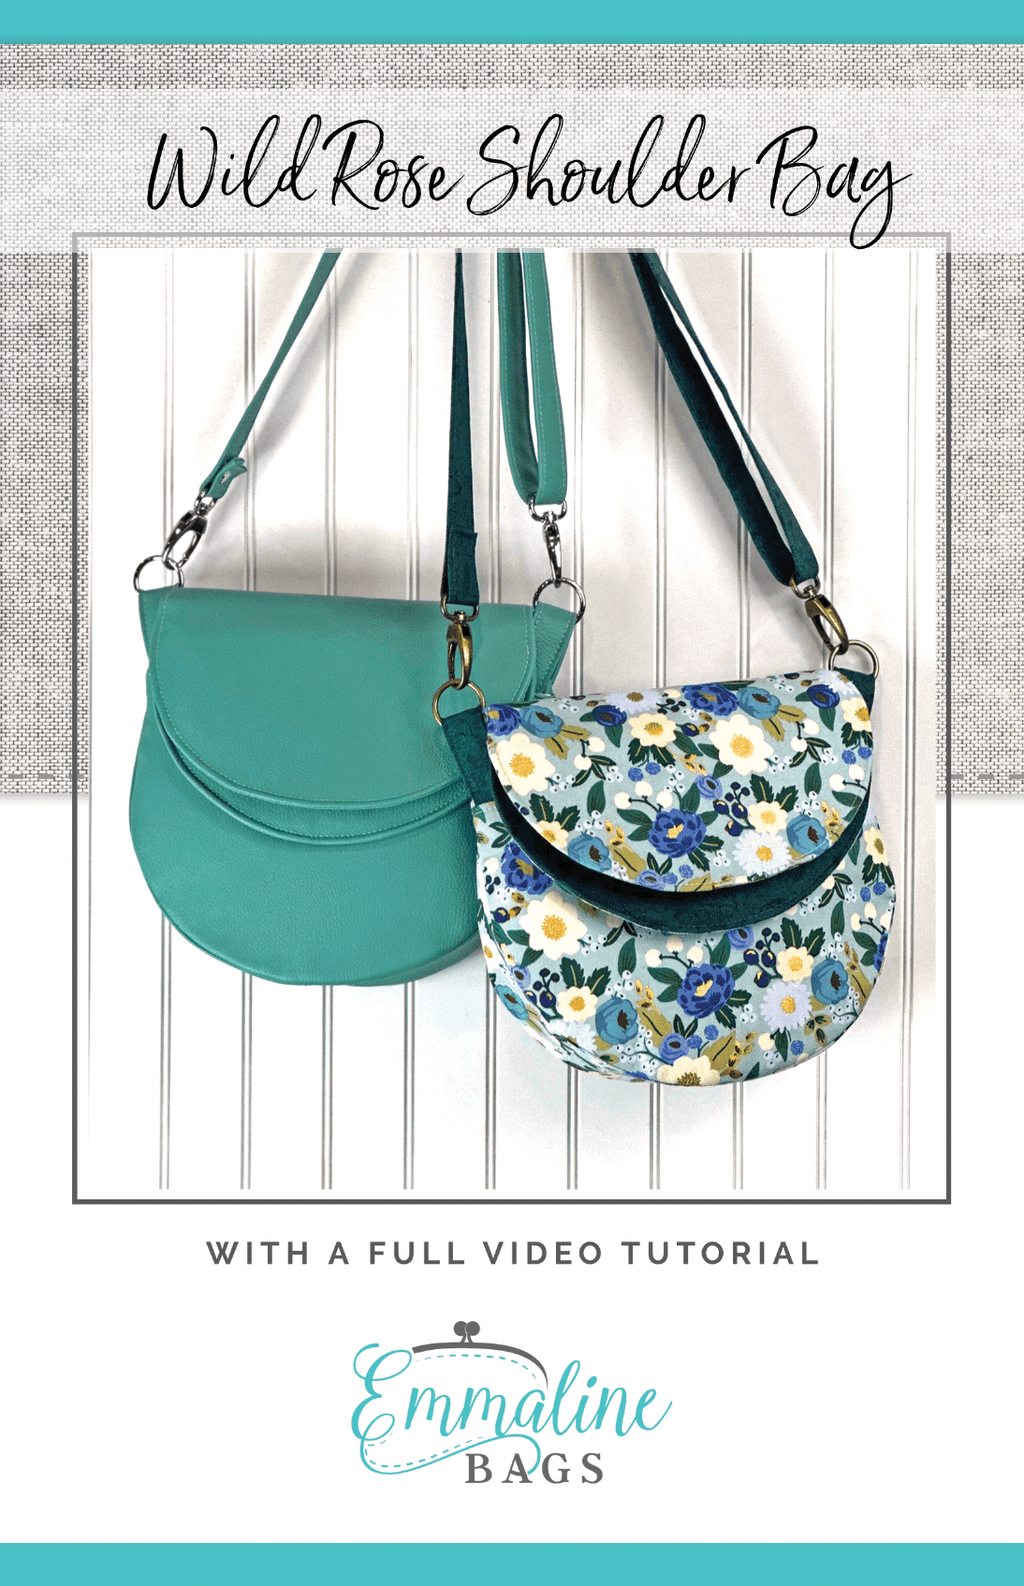 DIY Foldover Clutch with Shoulder Strap FREE Sewing Tutorial